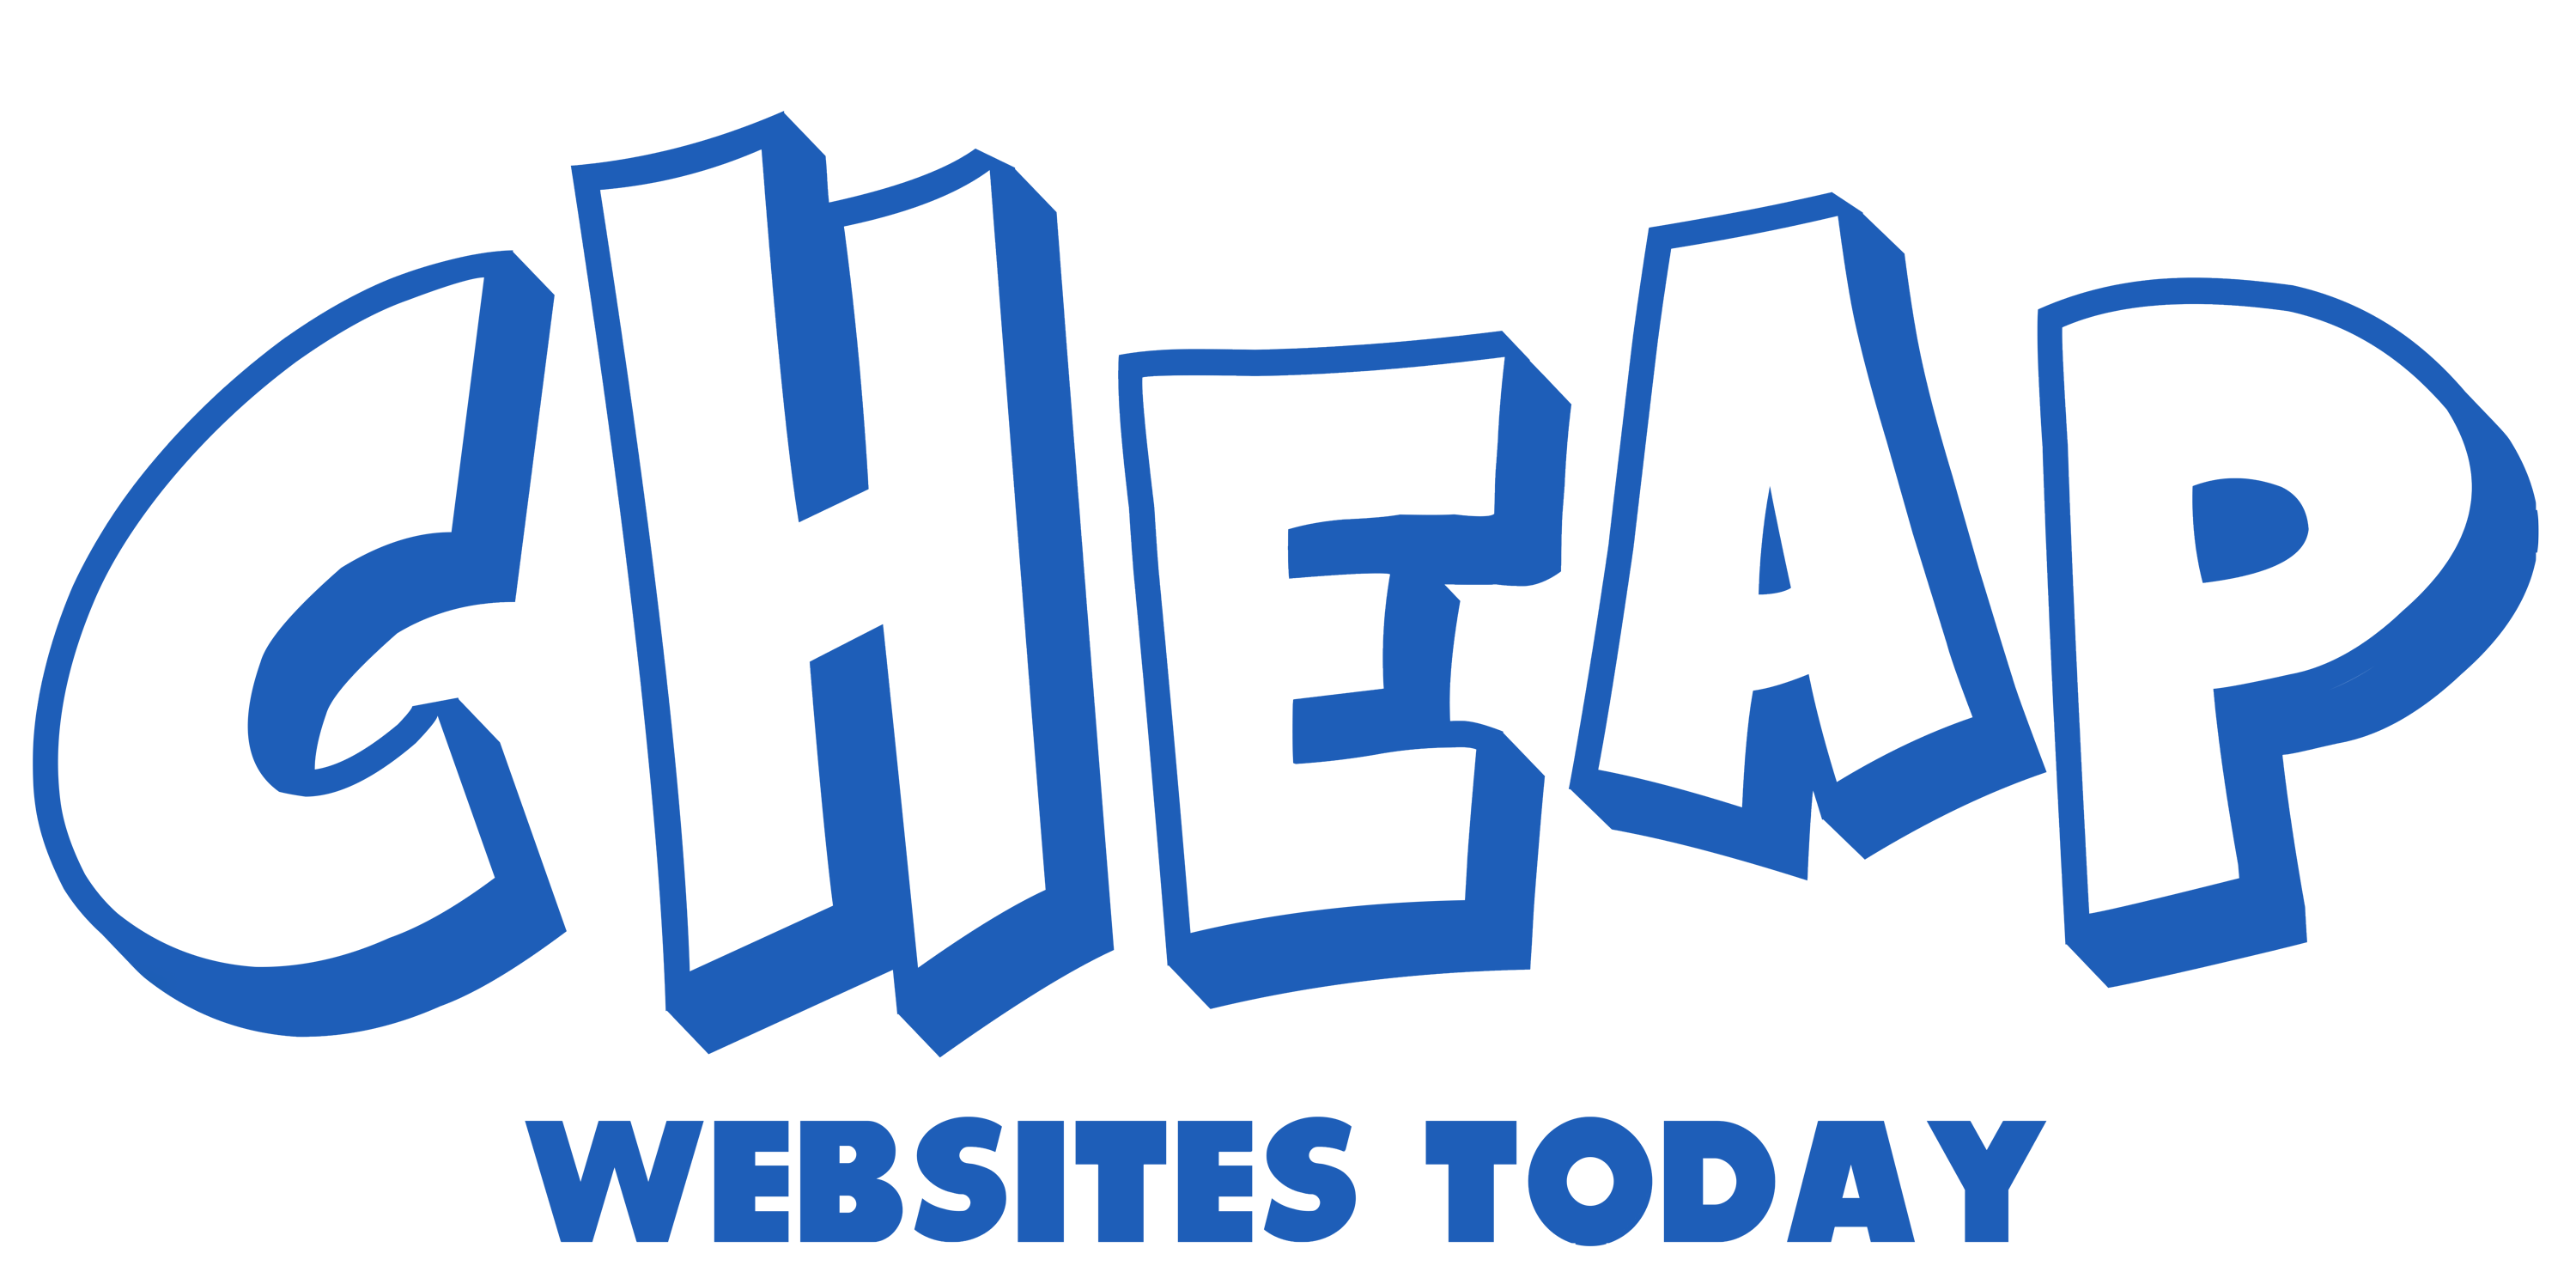 Cheap Websites Today